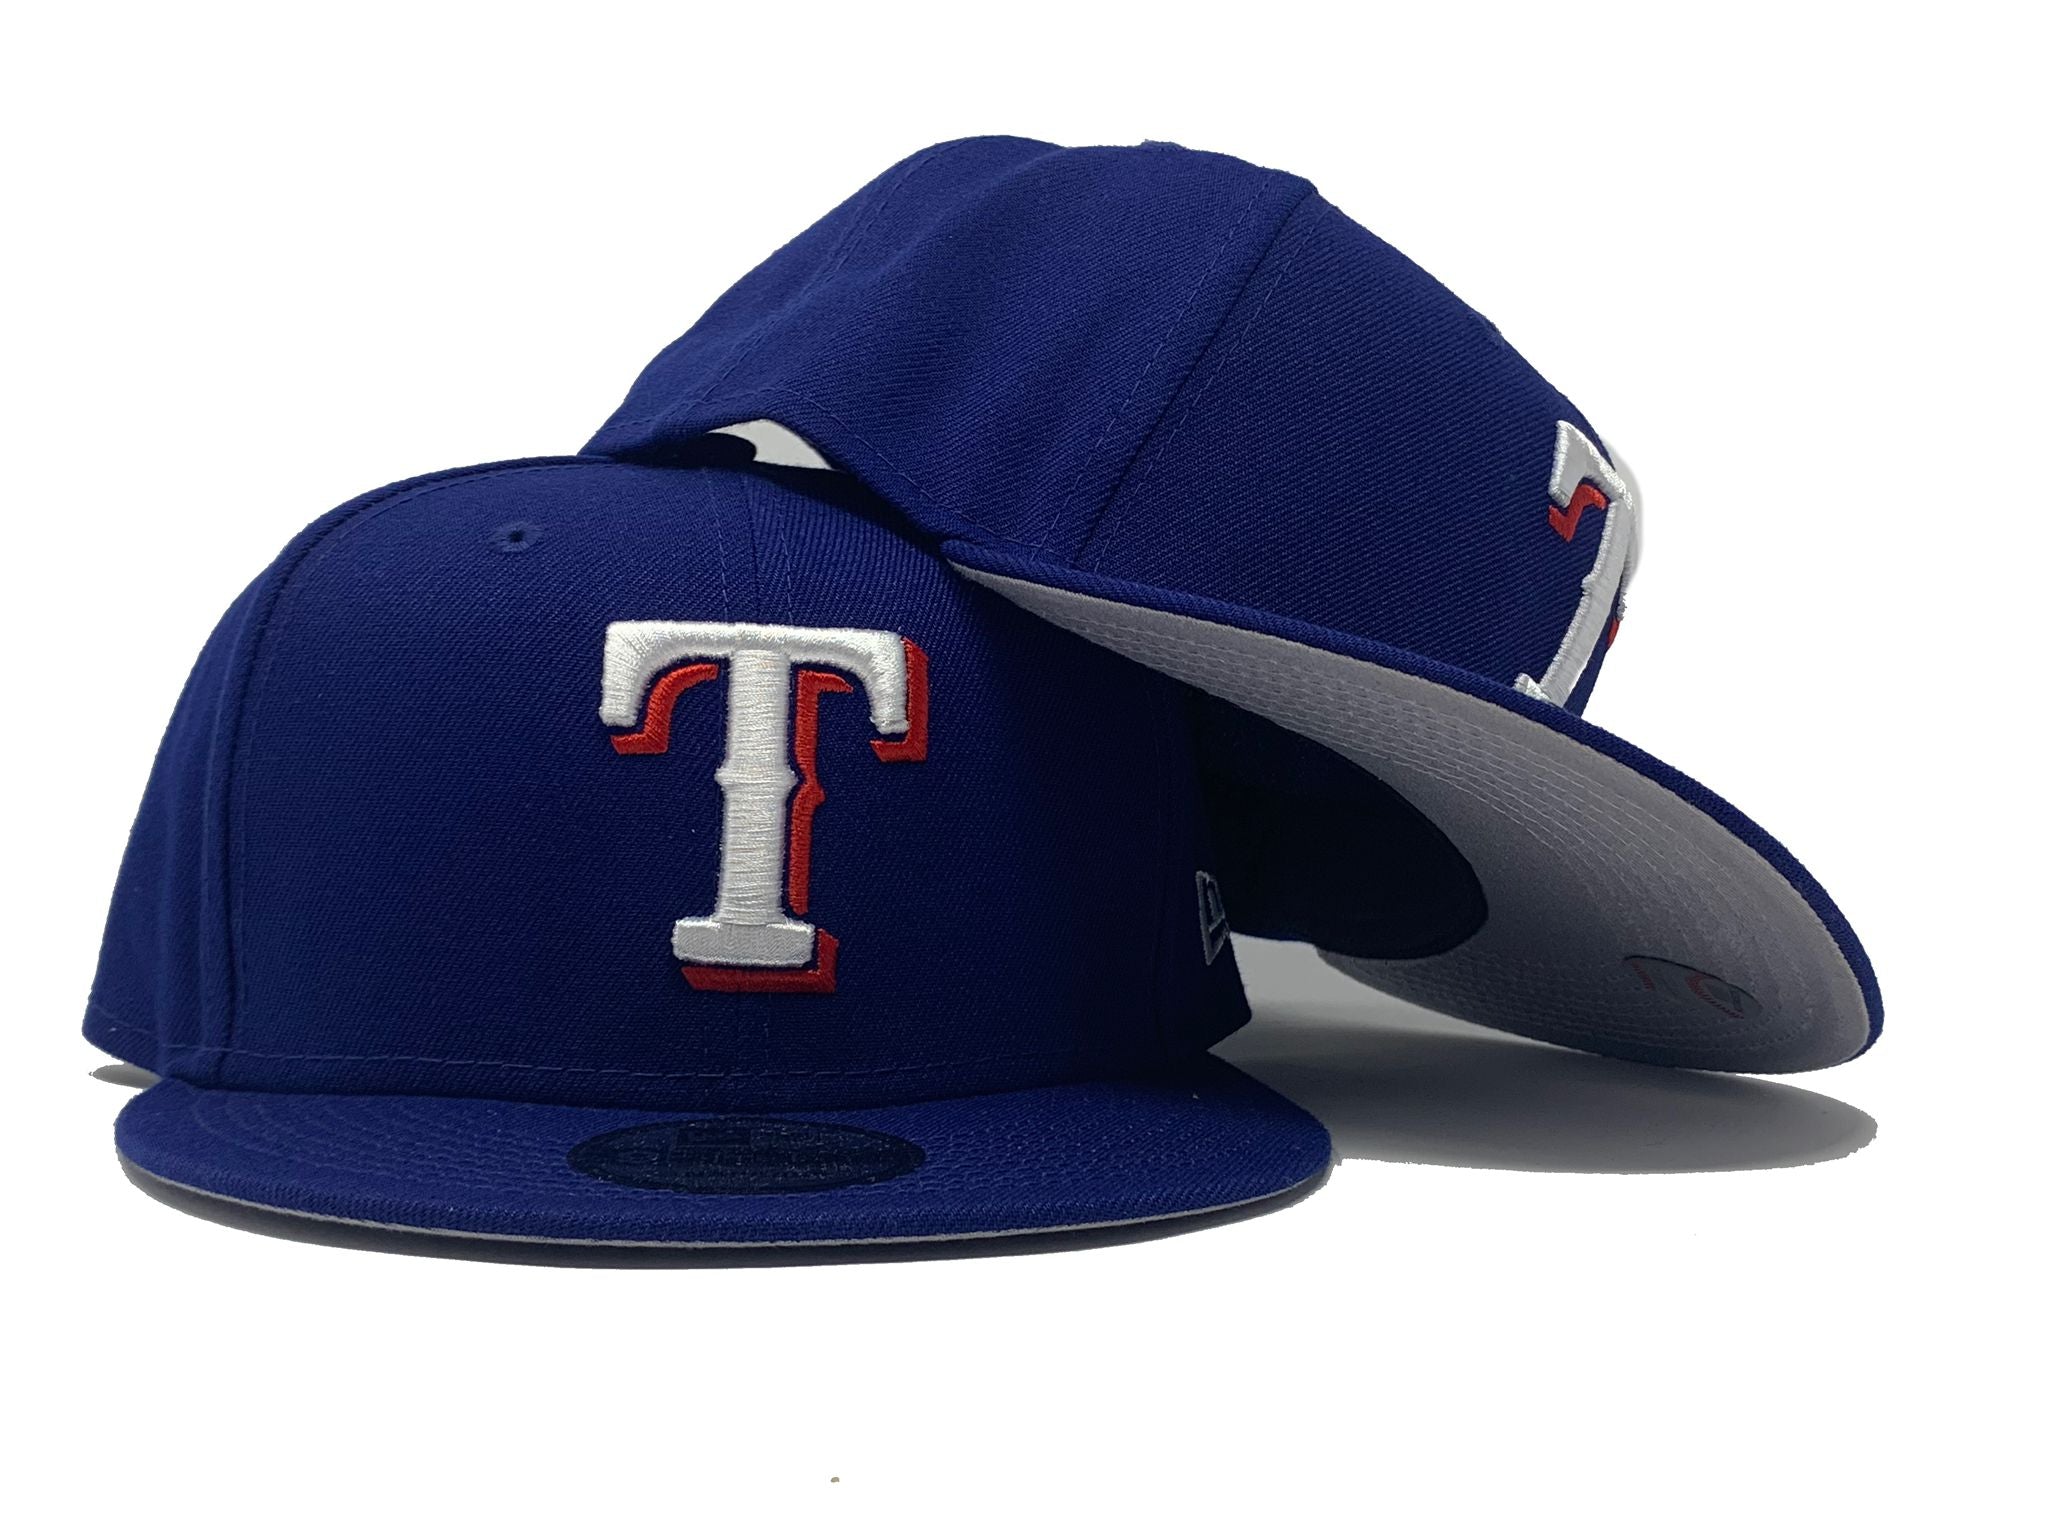 Royal Blue Texas Rangers Red Bottom 50th Anniversary Side Patch New Era 9FIFTY Snapback